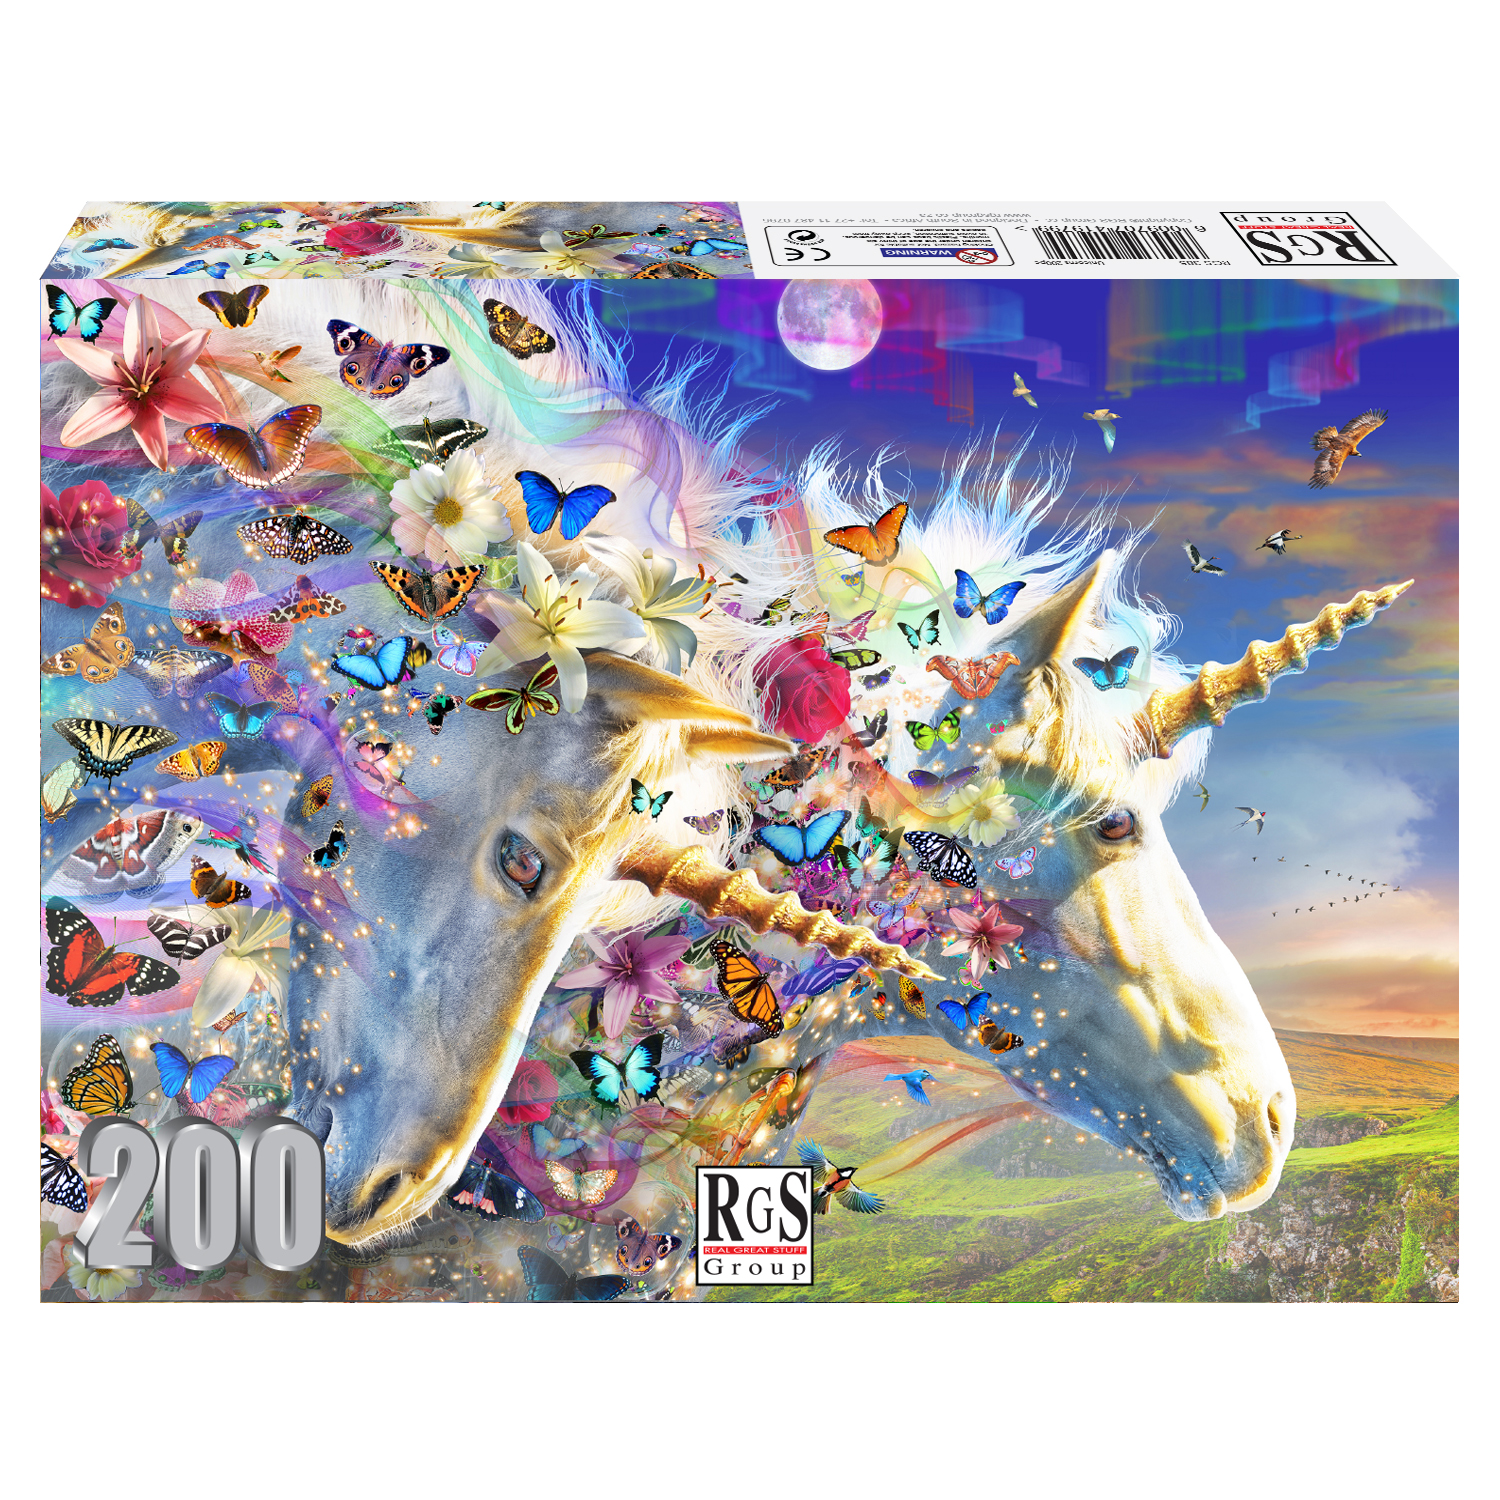 box containing 200pc puzzle of unicorns surreounded by butterflies